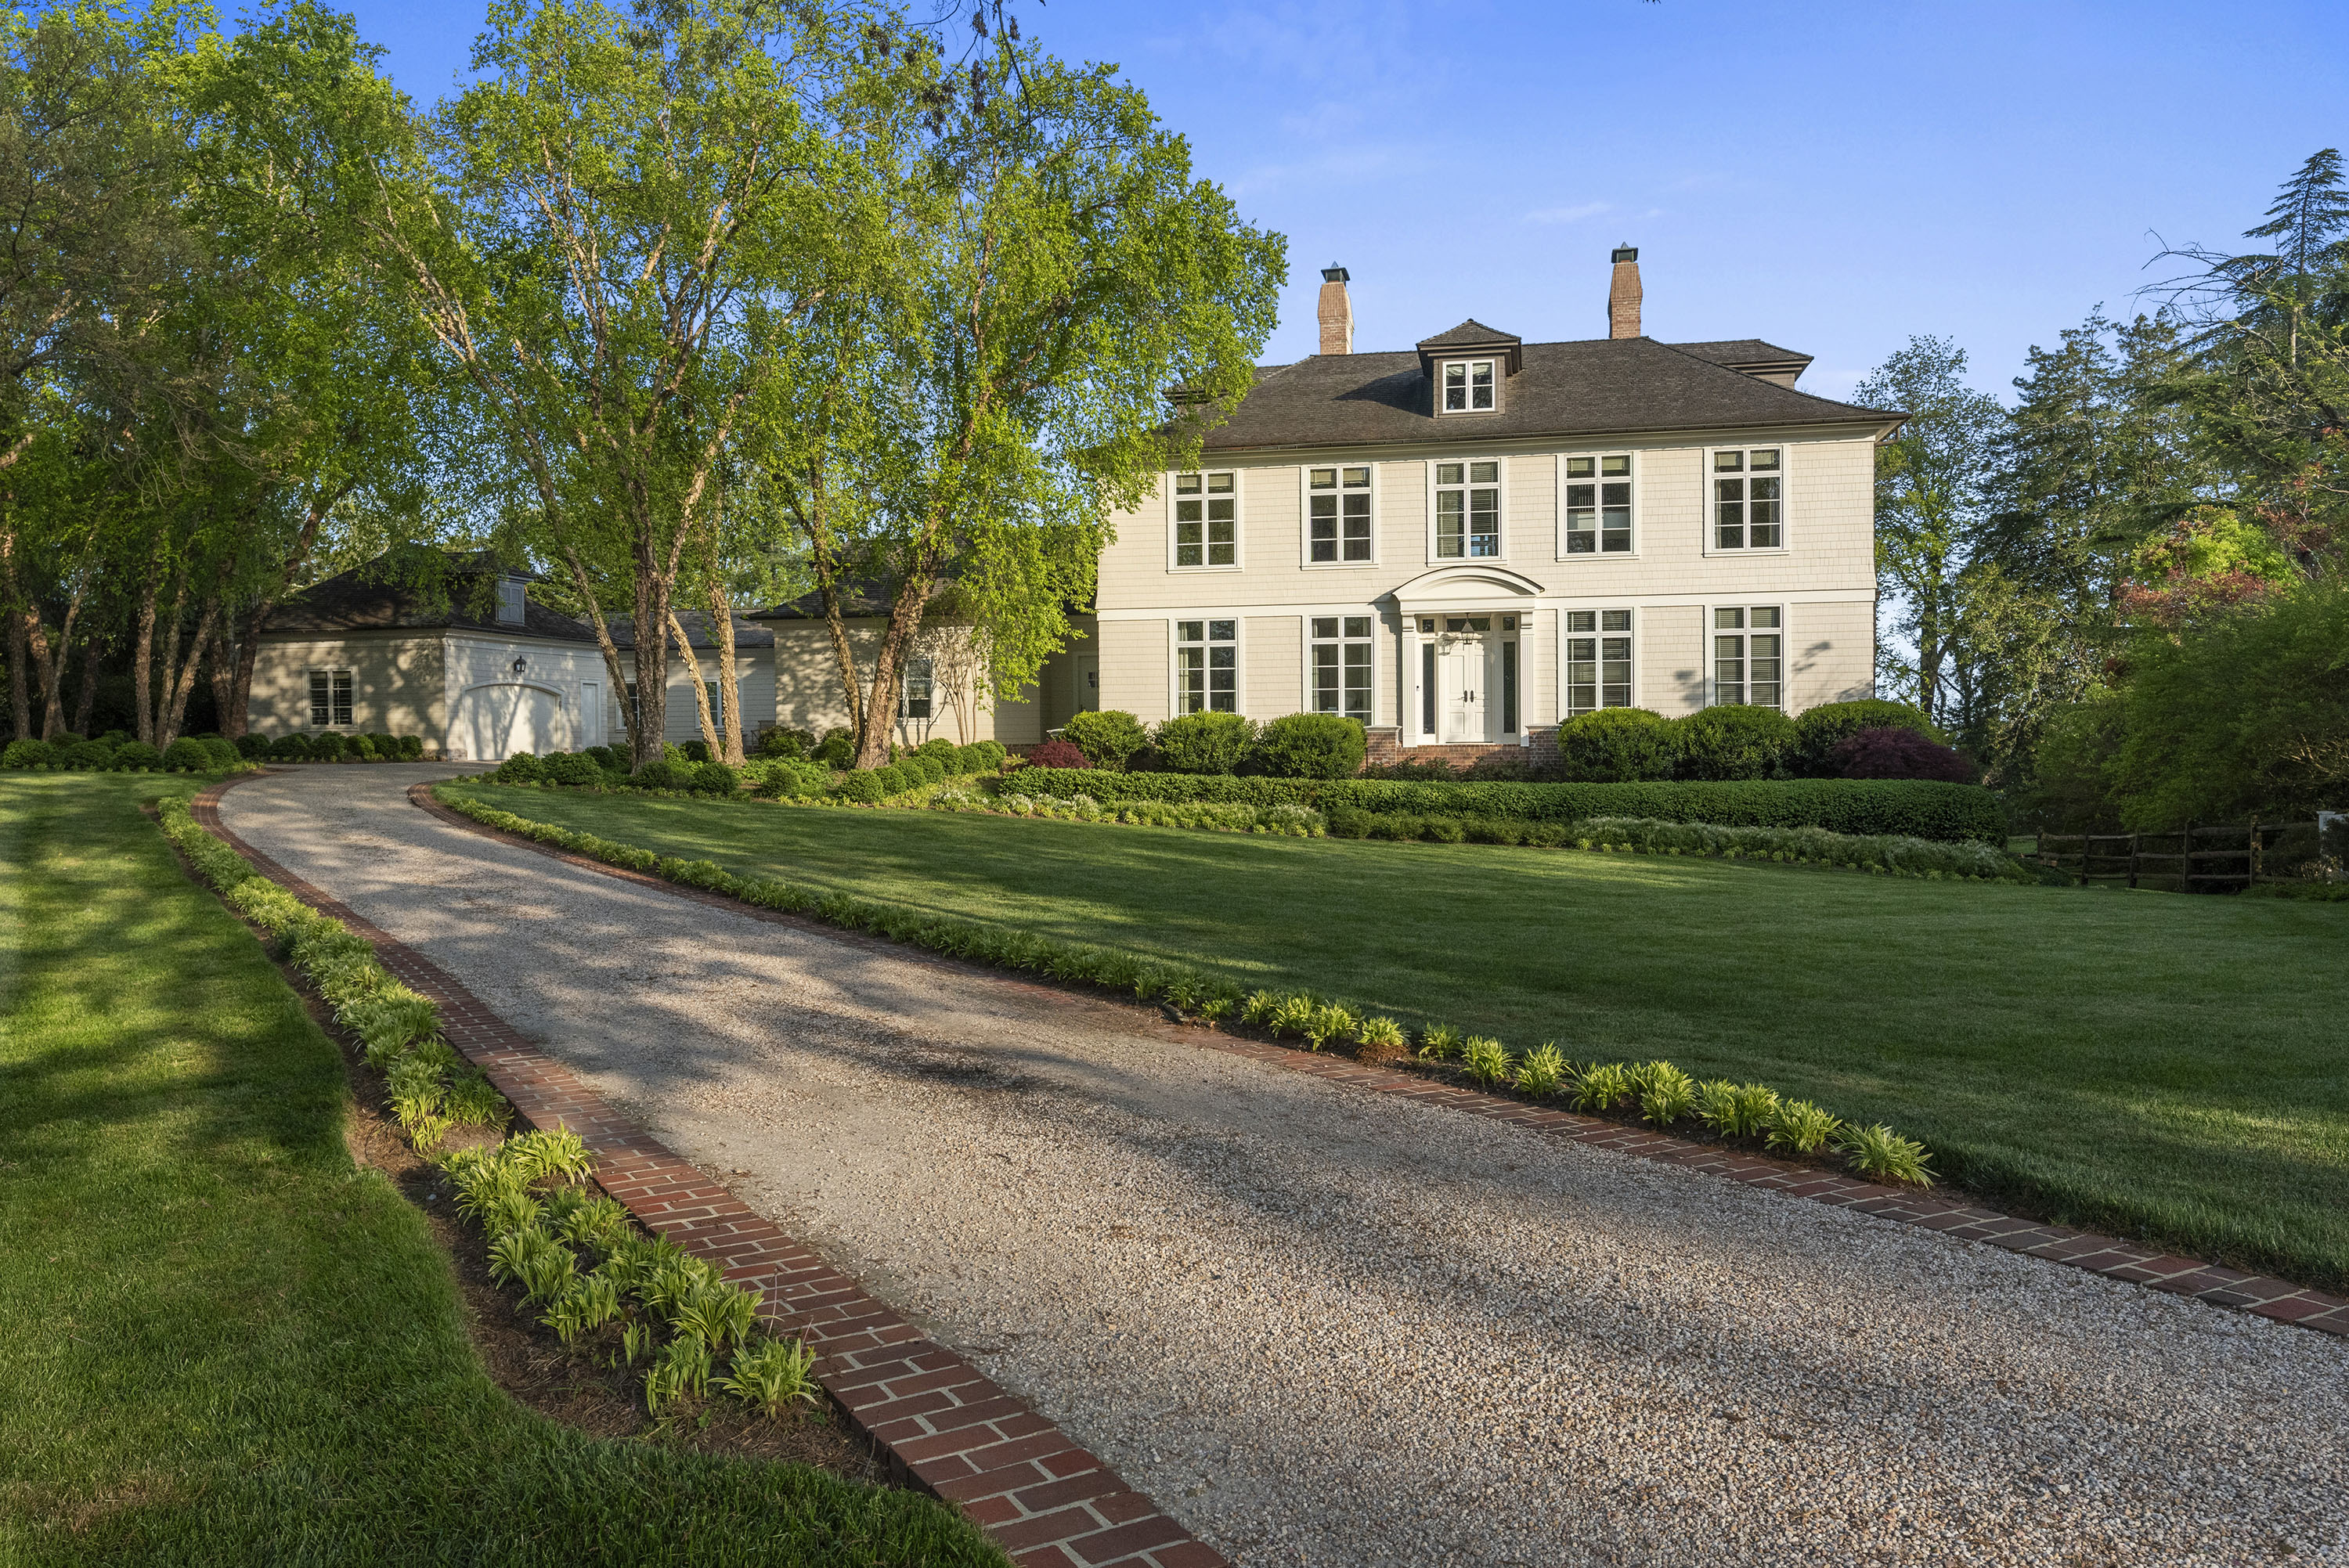 3355 Harness Creek is located in Annapolis, Maryland.(Michele Sheiko, Chesapeake Home Images)